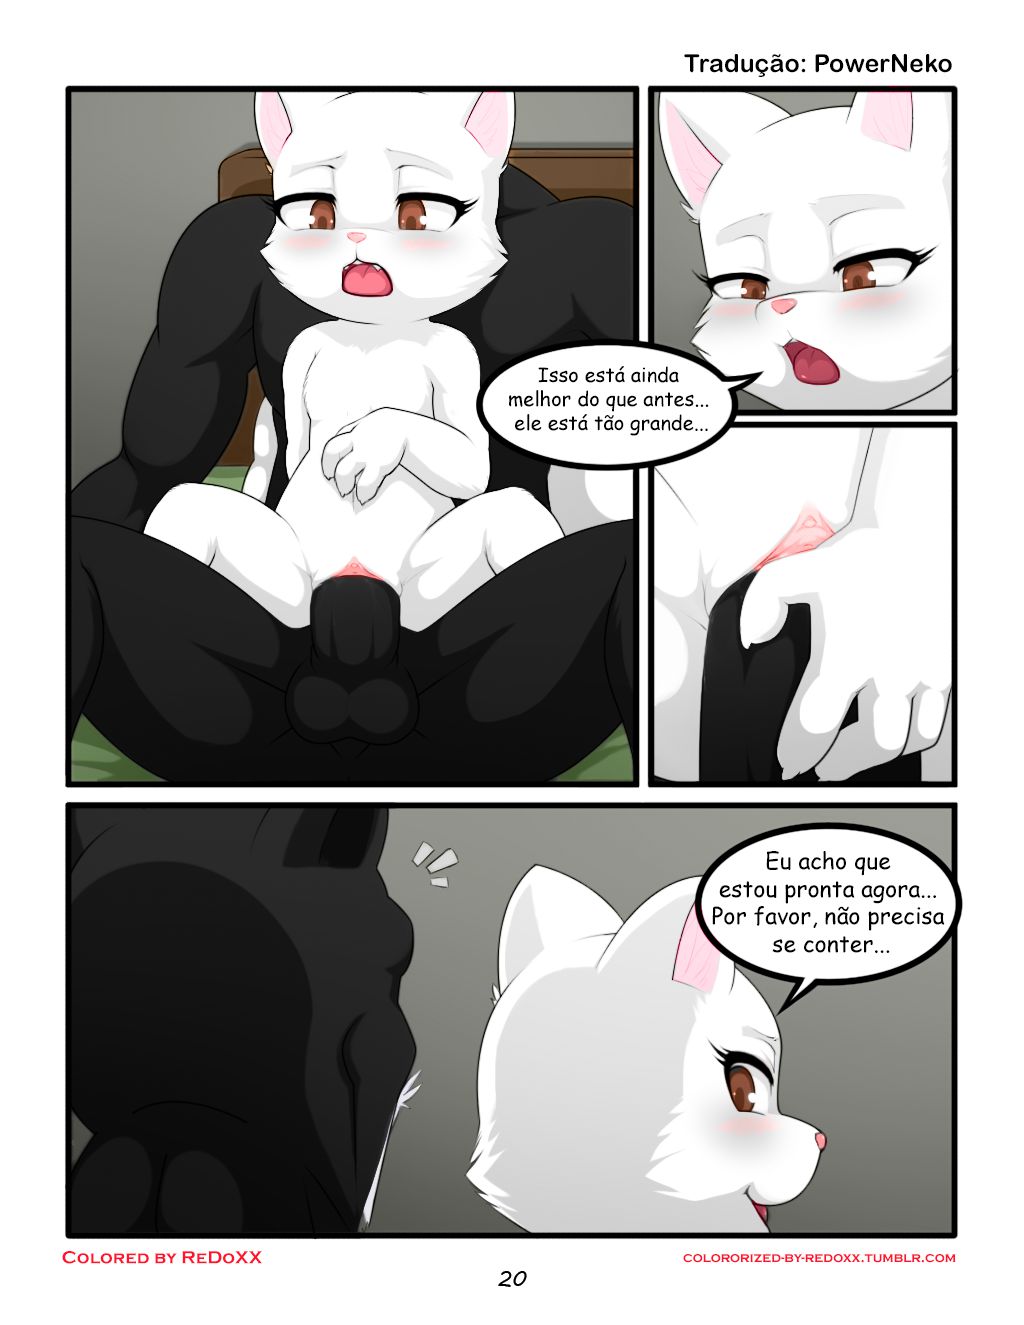 [Darkmirage]Size Counts (O Tamanho Importa) [Colorized by ReDoXX] [Portuguese-BR] [Translated by PowerNeko] 21